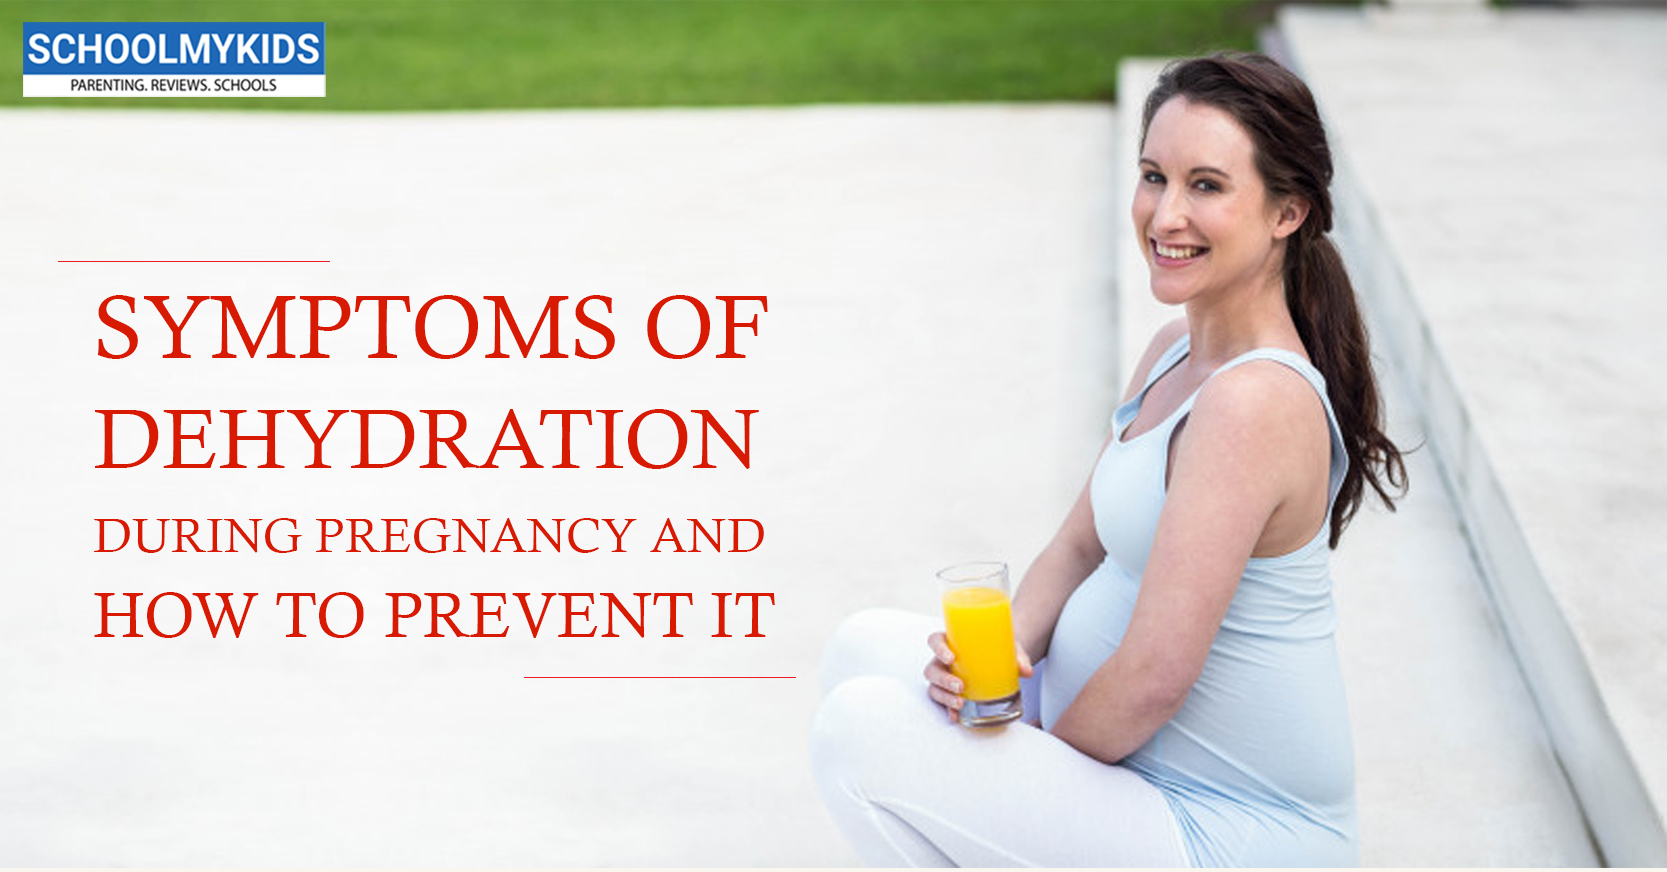 Symptoms Of During Pregnancy And How To Prevent It | SchoolMyKids